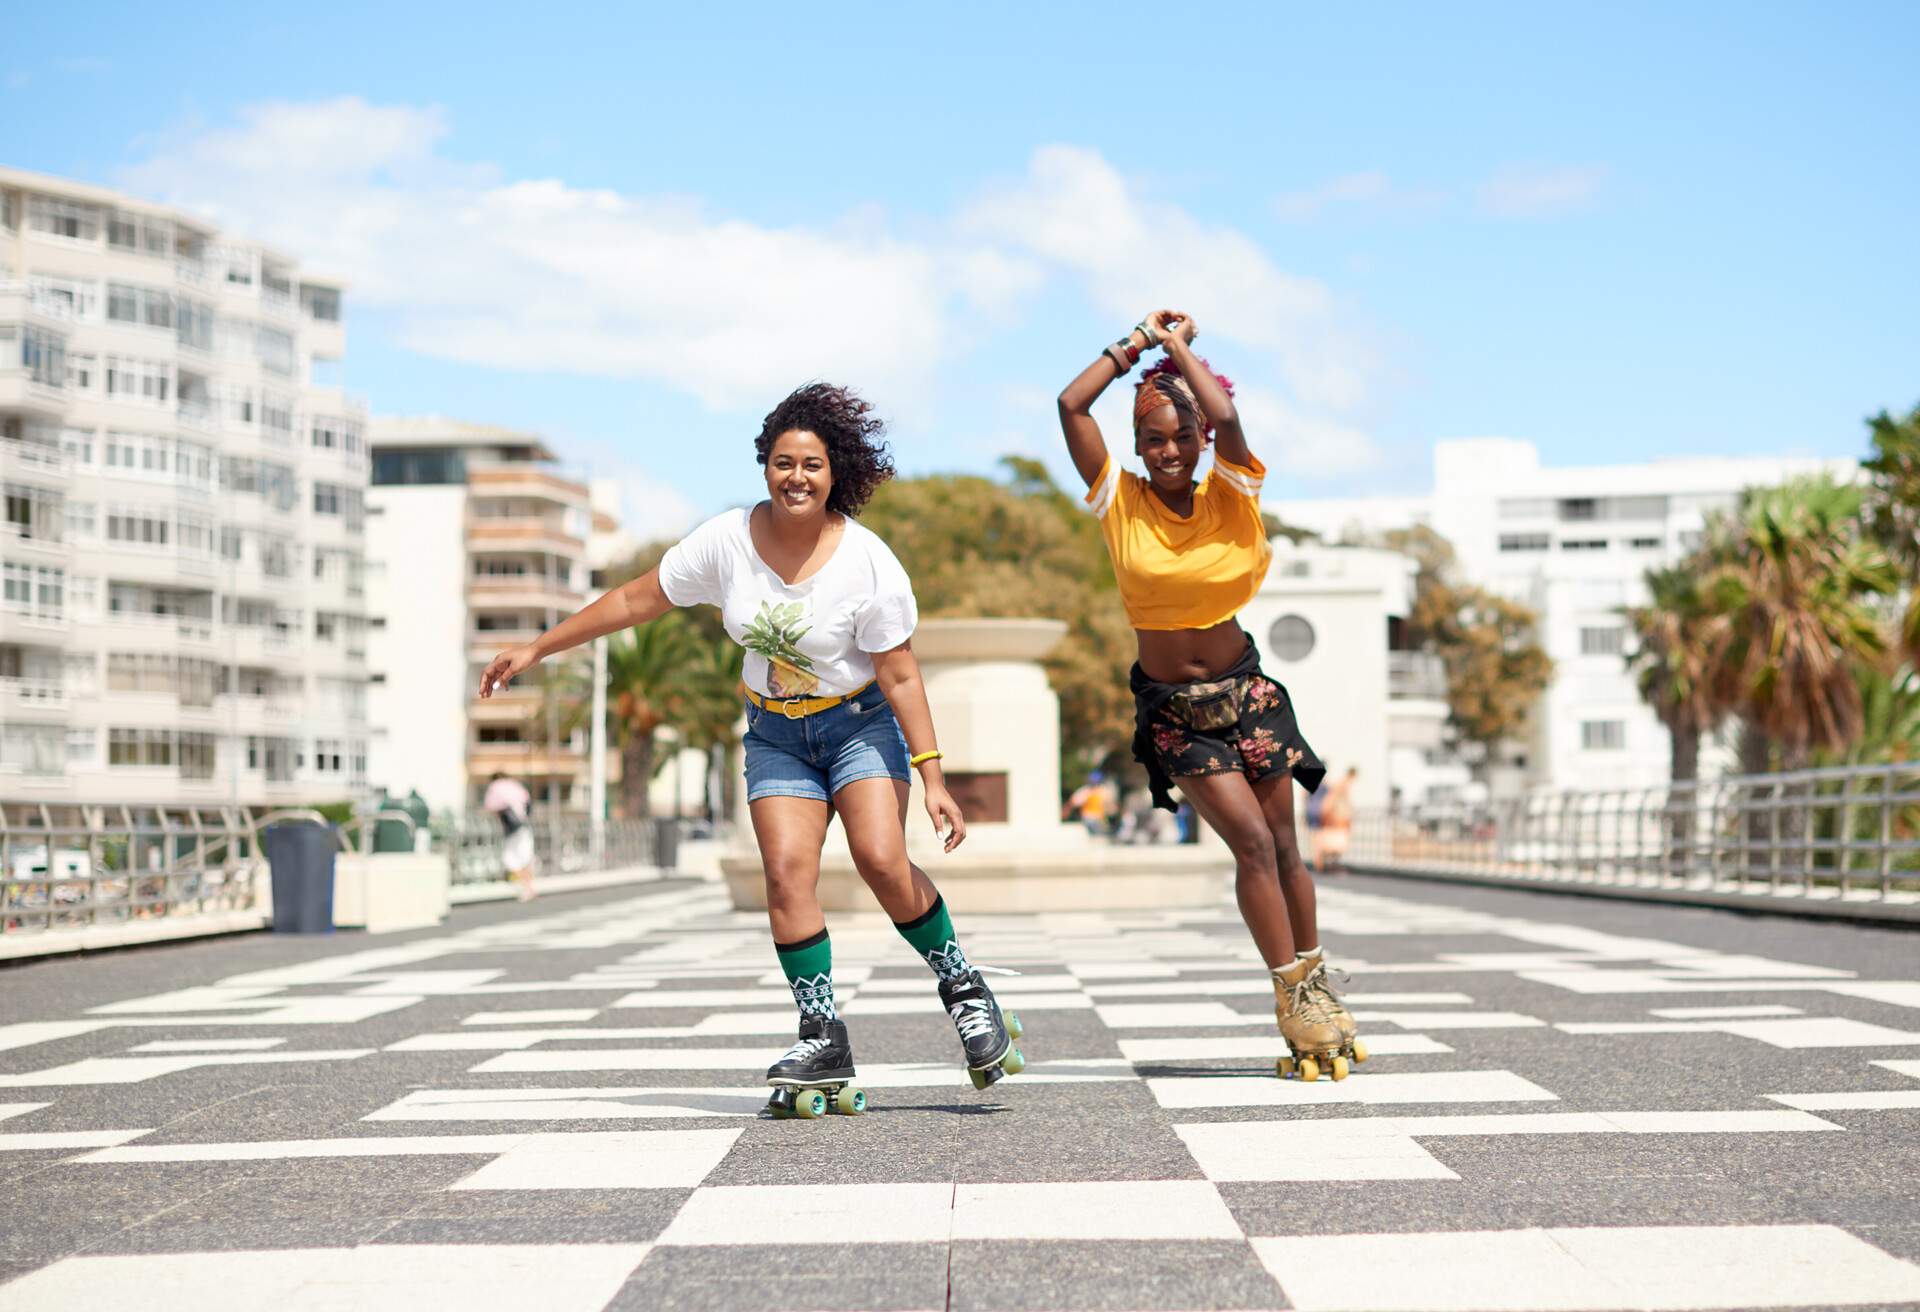 DEST_SOUTH-AFRICA_CAPE_TOWN_THEME_PEOPLE_FRIENDS_SKATERS_GettyImages-1136445765